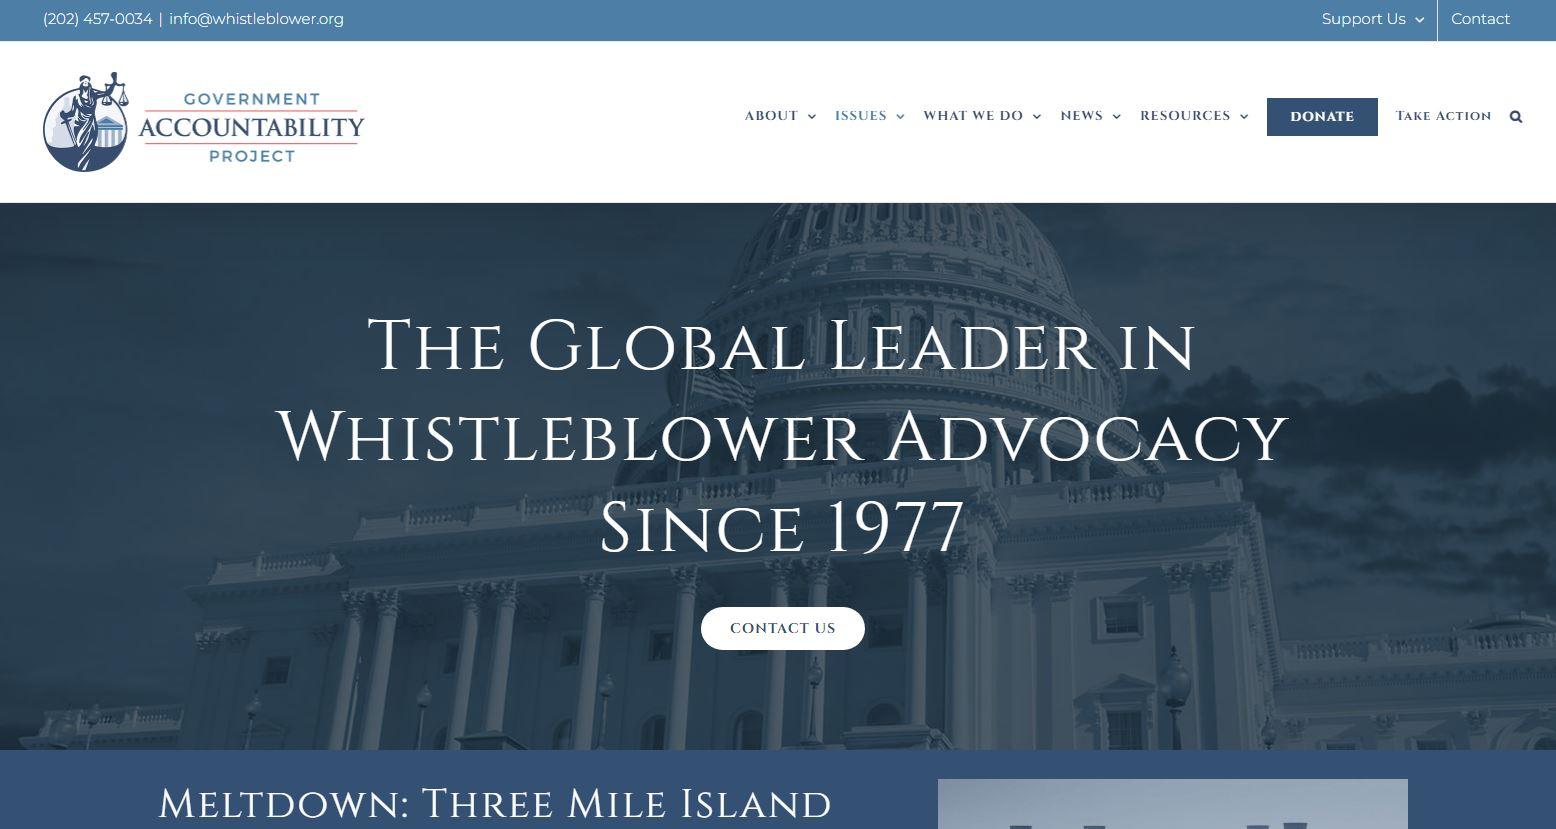 charity website design examples, Government Accountability Project